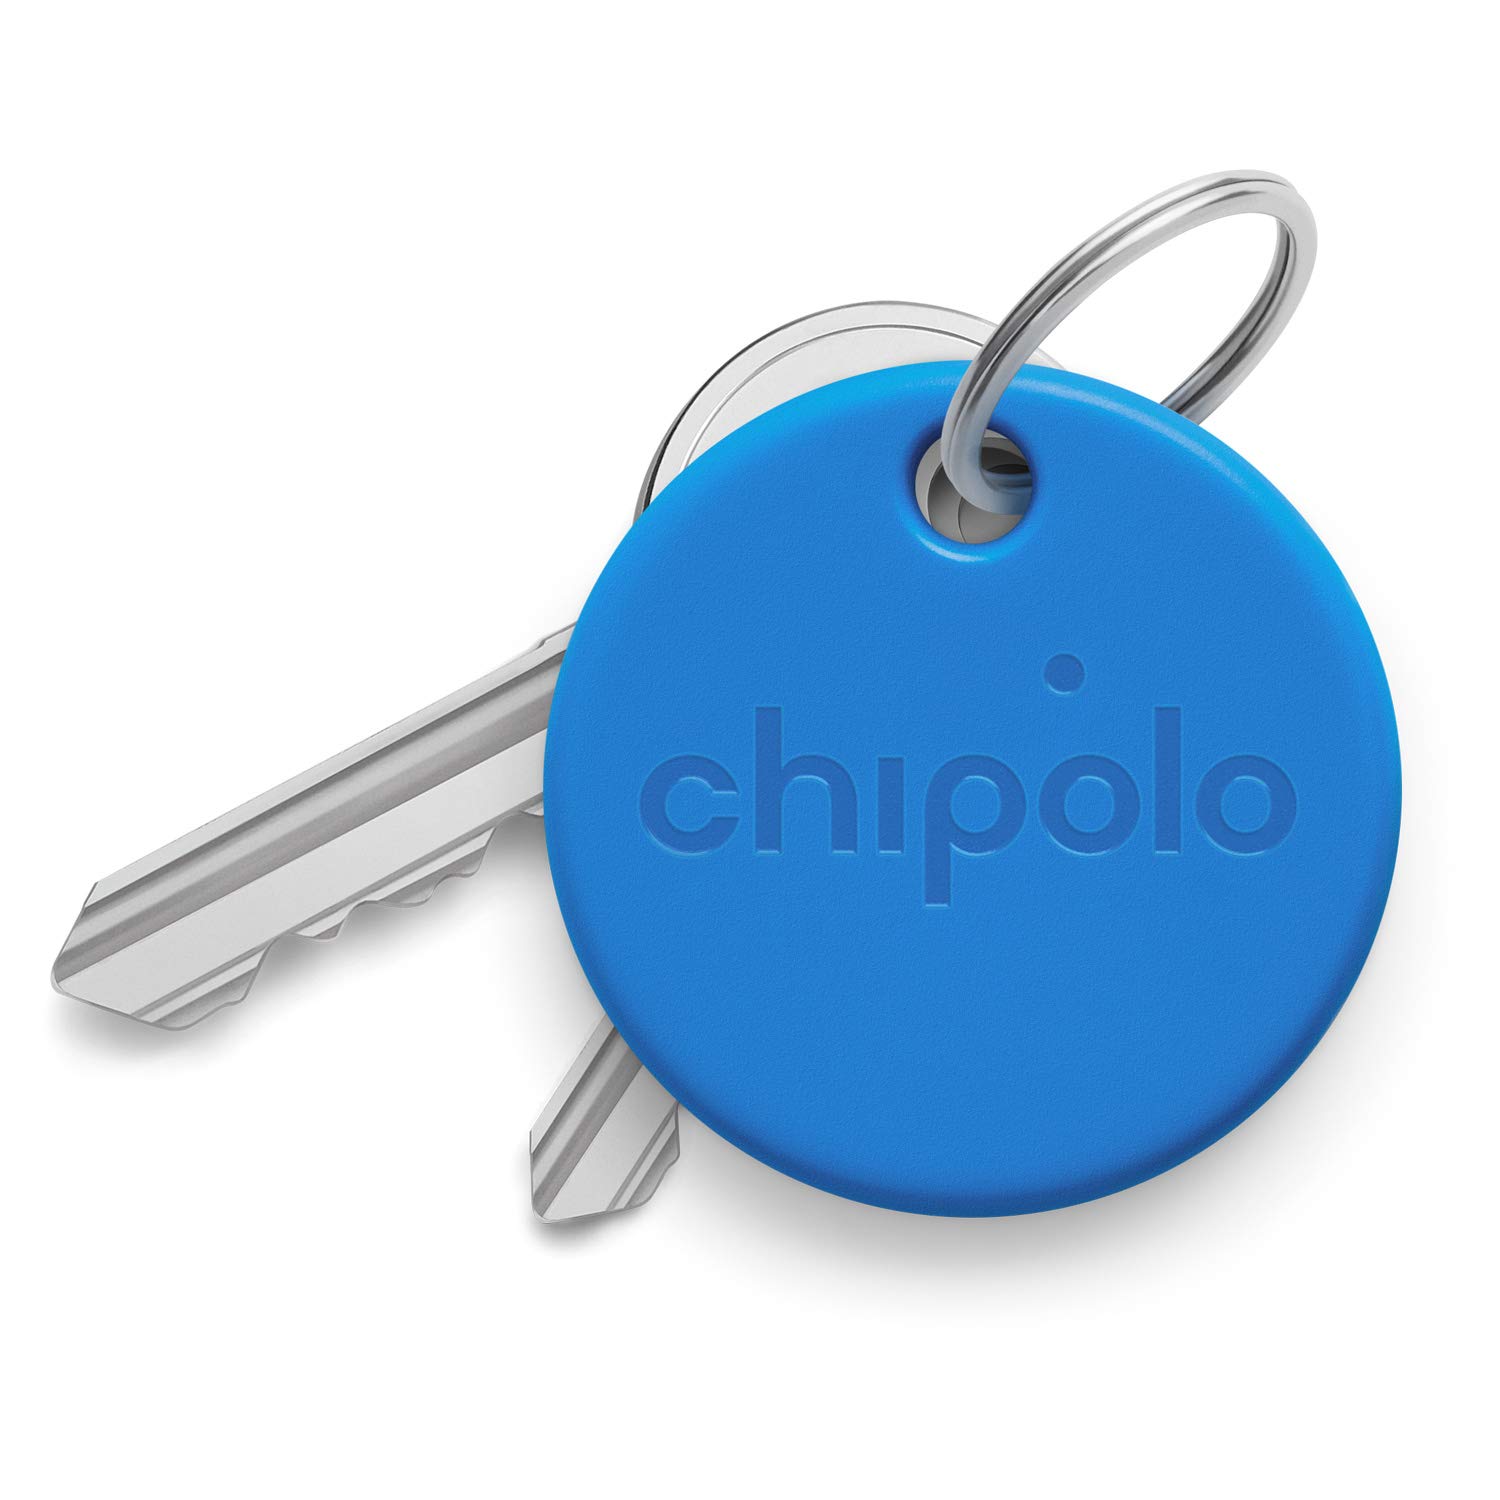 Chipolo ONE Key Finder 2 Pack – 2 Key Finders for Keys, car Keys, Bag. Bluetooth Tracker for Keys, Works with The Chipolo app on Android and iOS